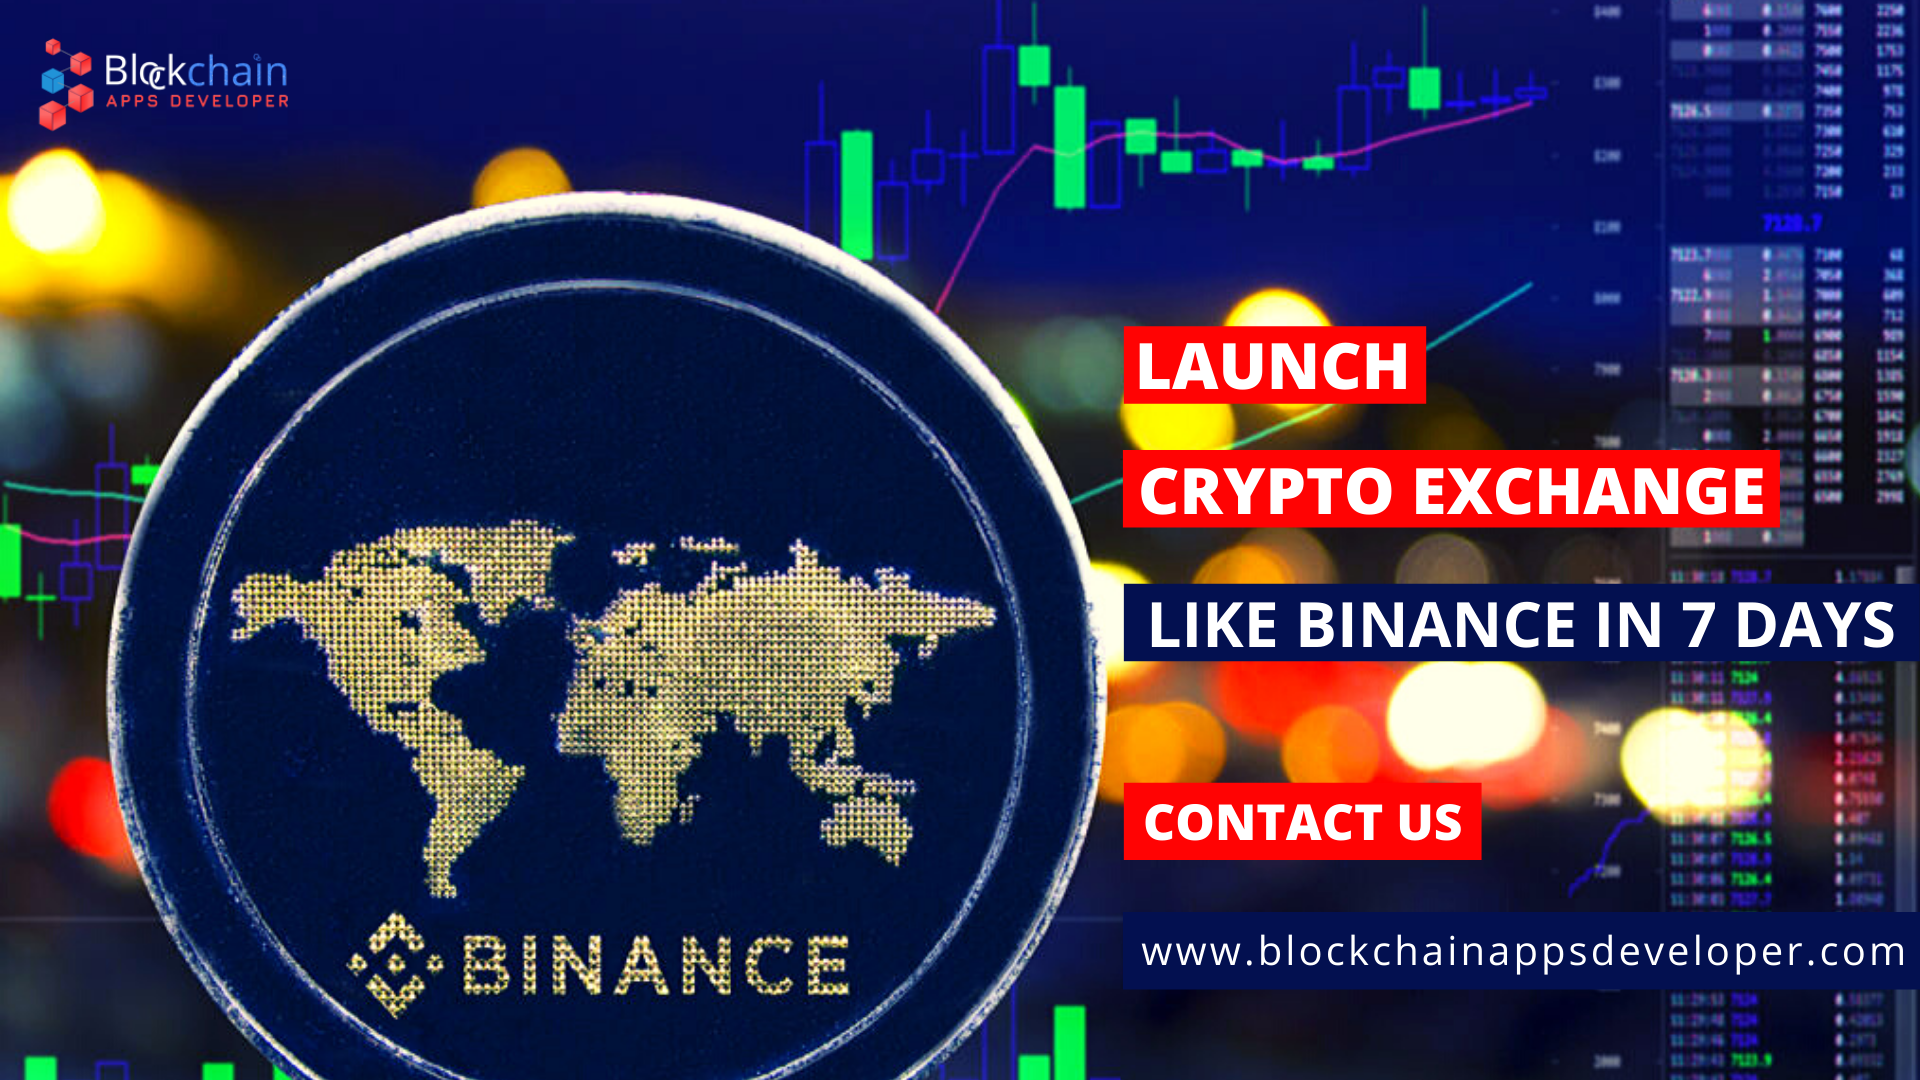 Launch Cryptocurrency Exchange Like Binance in 7 Days